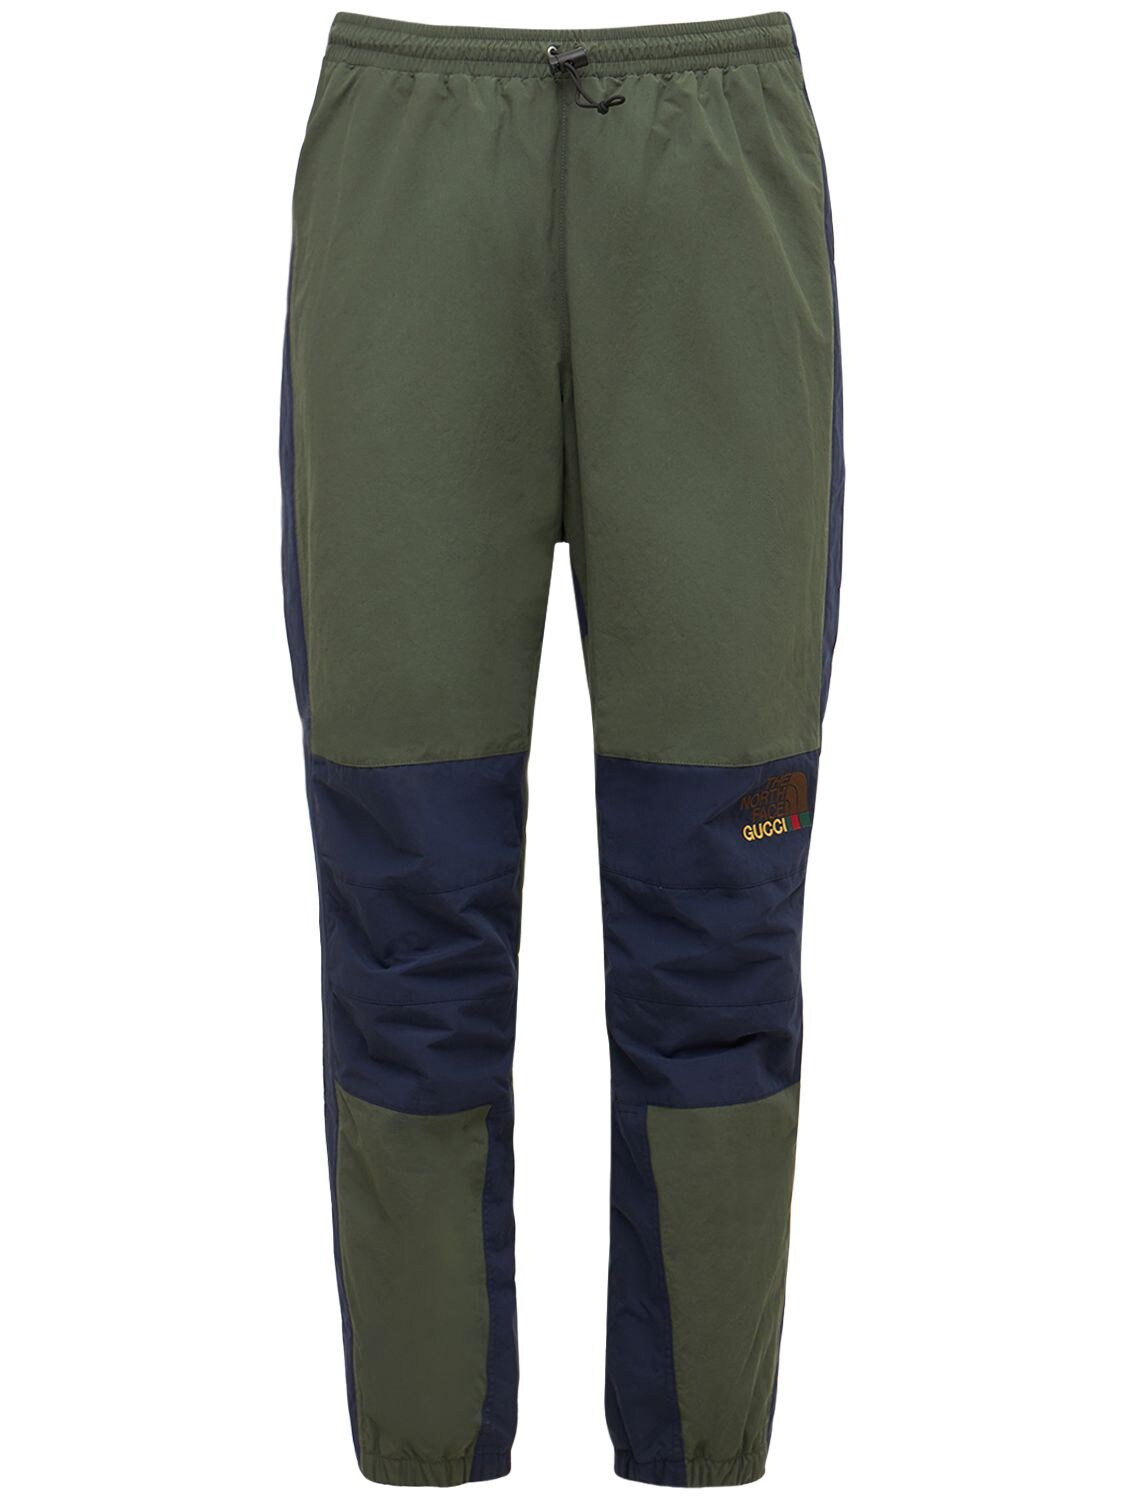 X The North Face Technical Cotton Pants